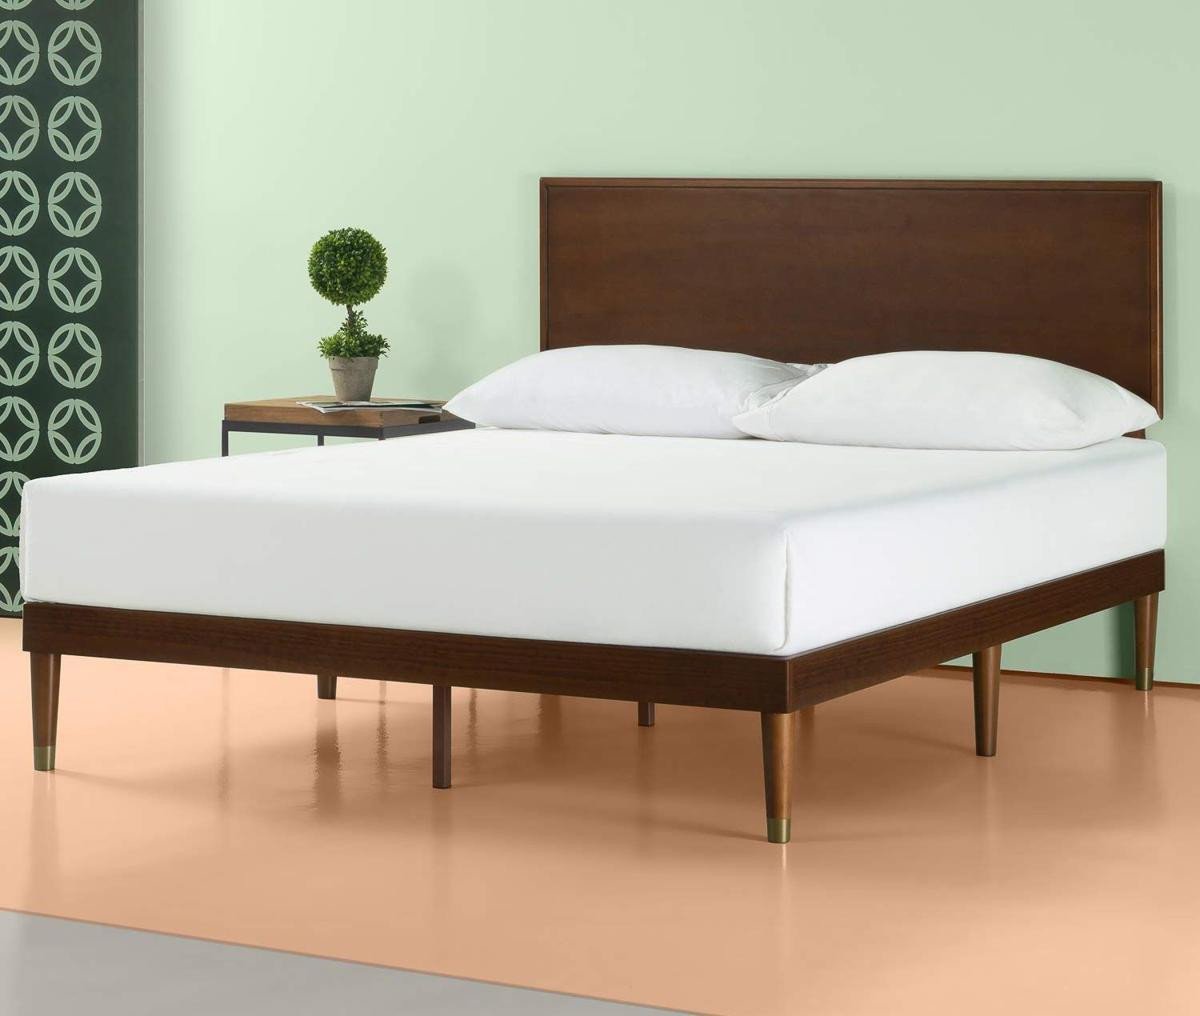 Mid Century Modern Bedroom Fresh Get A West Elm Look for Under $300 with This Mid Century Bed